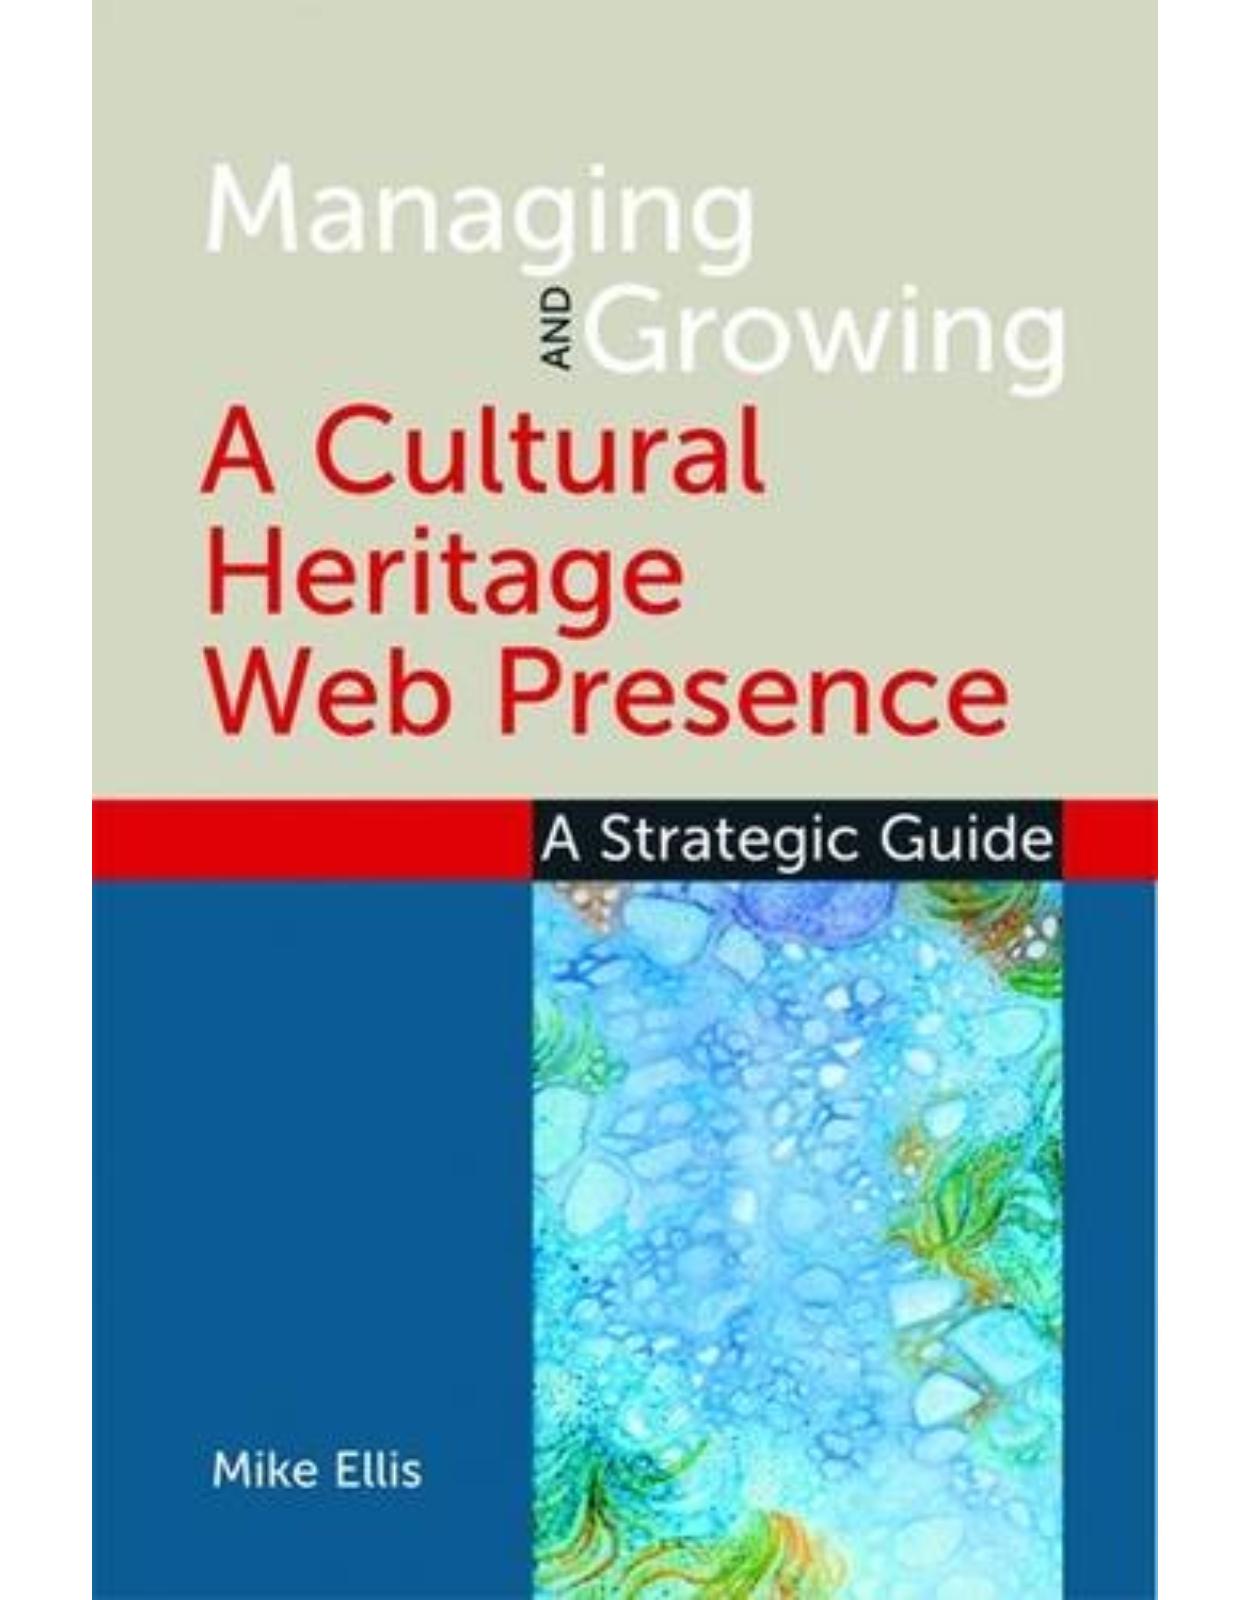 Managing and Growing a Cultural Heritage Web Presence  - A Strategic Guide